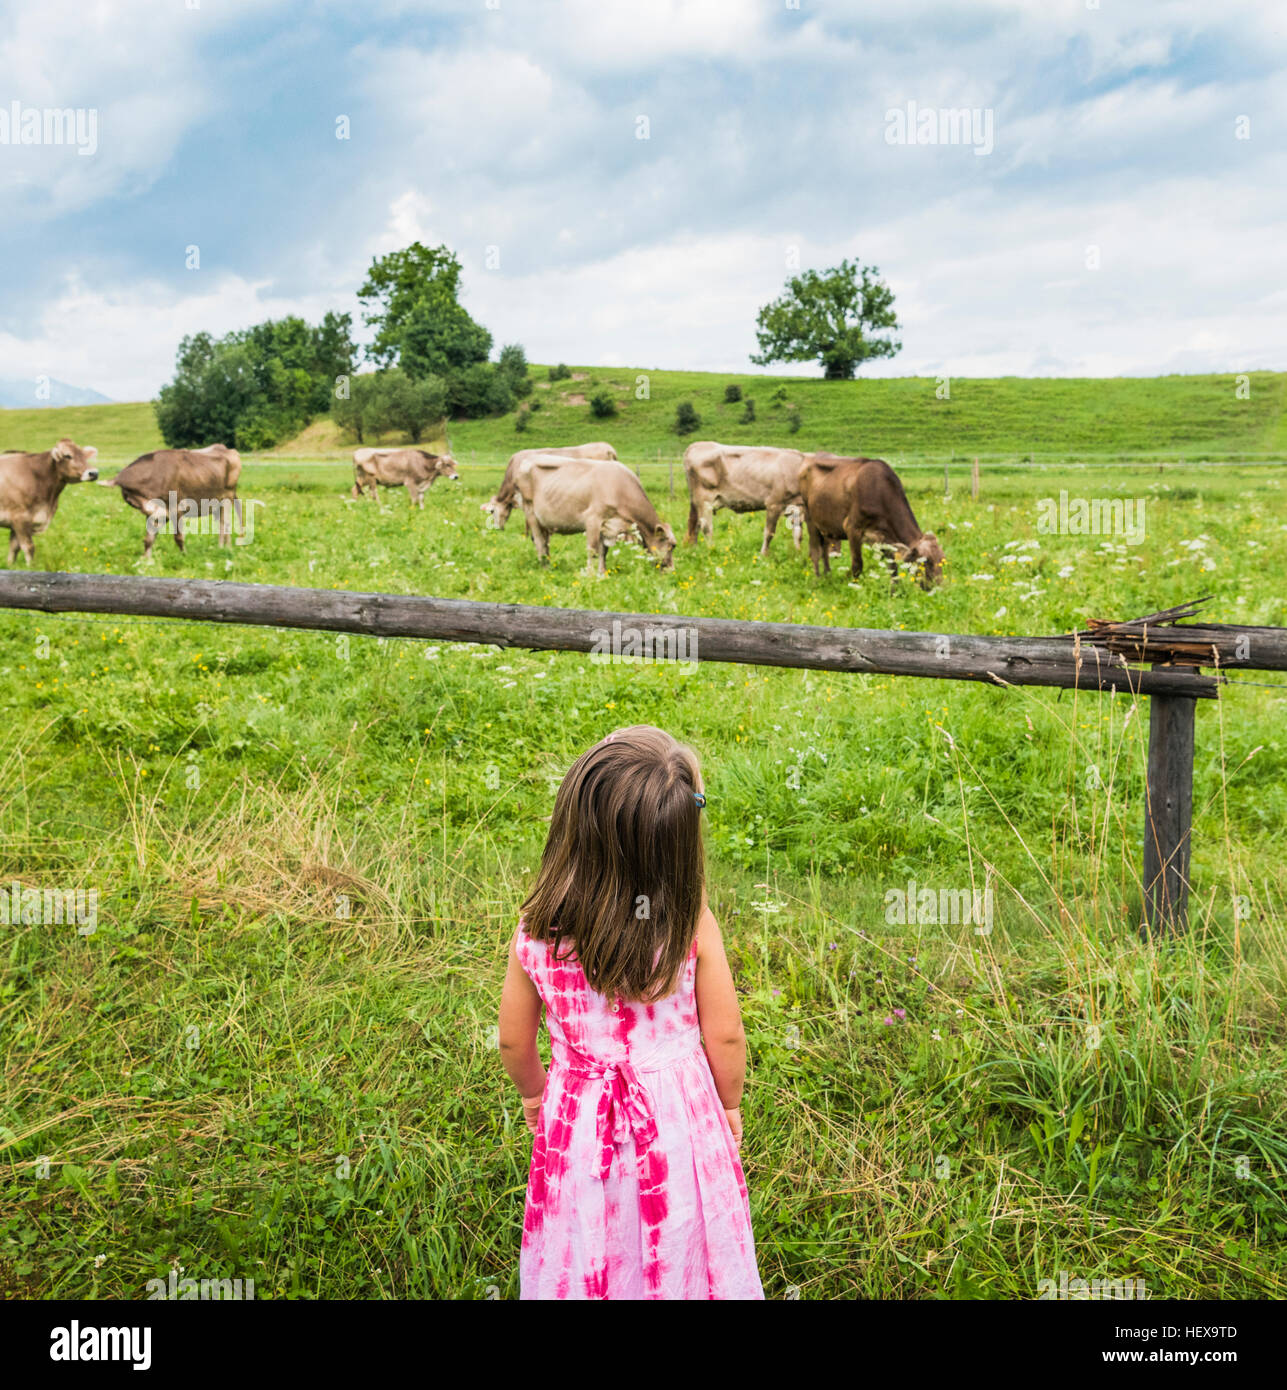 Real view of girl looking at cows grazing in field, Fuessen, Bavaria, Germany Stock Photo